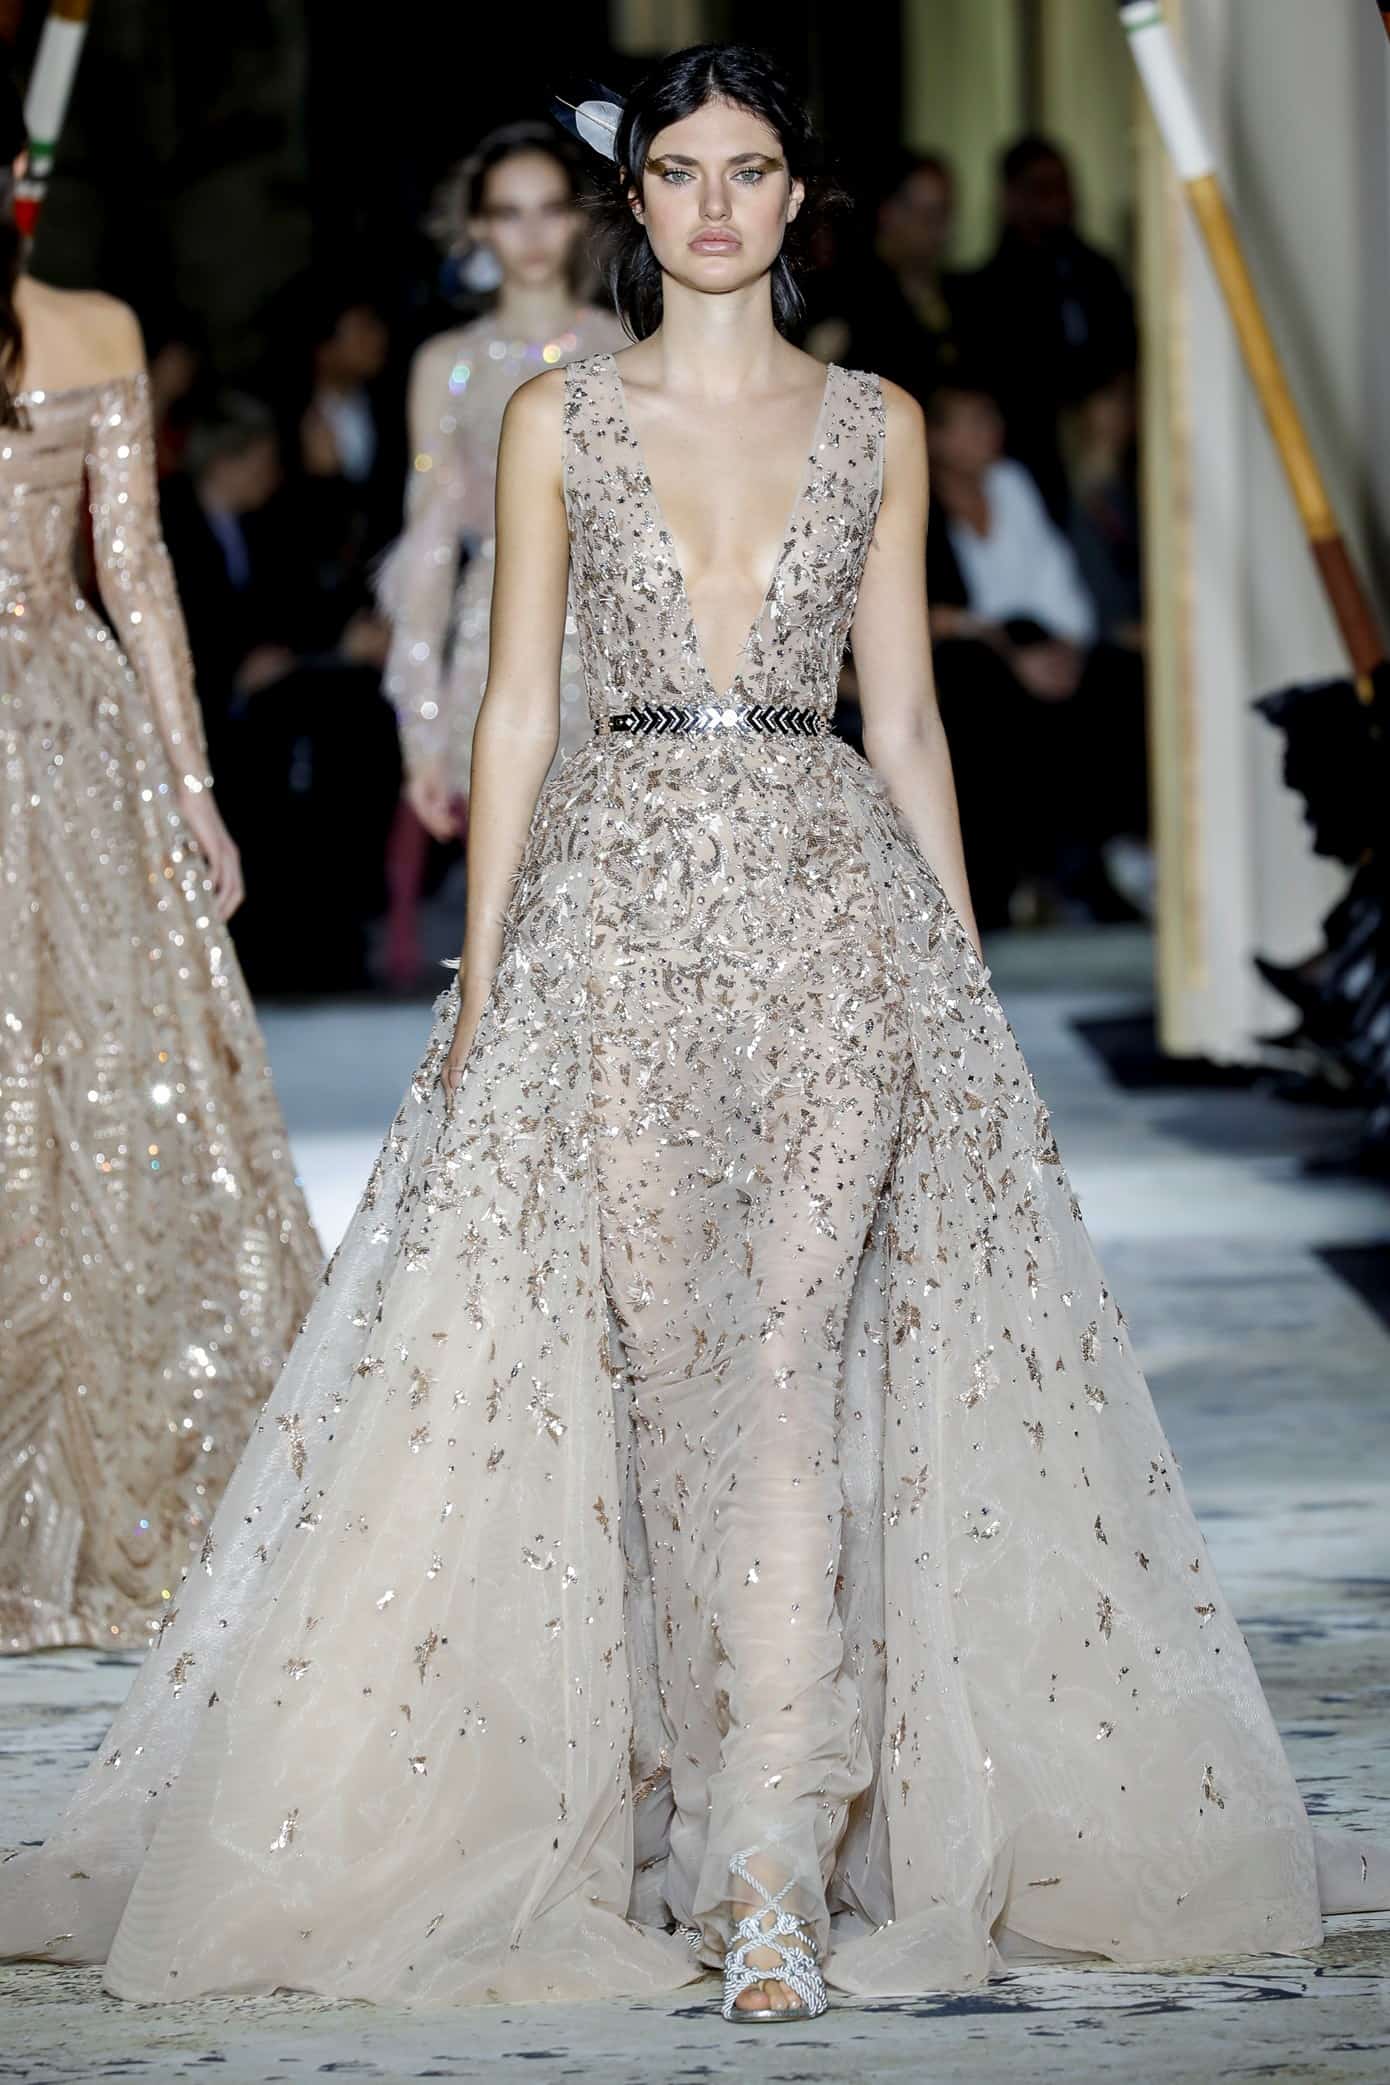 Zuhair Murad Haute Couture Spring-Summer 2018 - ALL FOR FASHION DESIGN